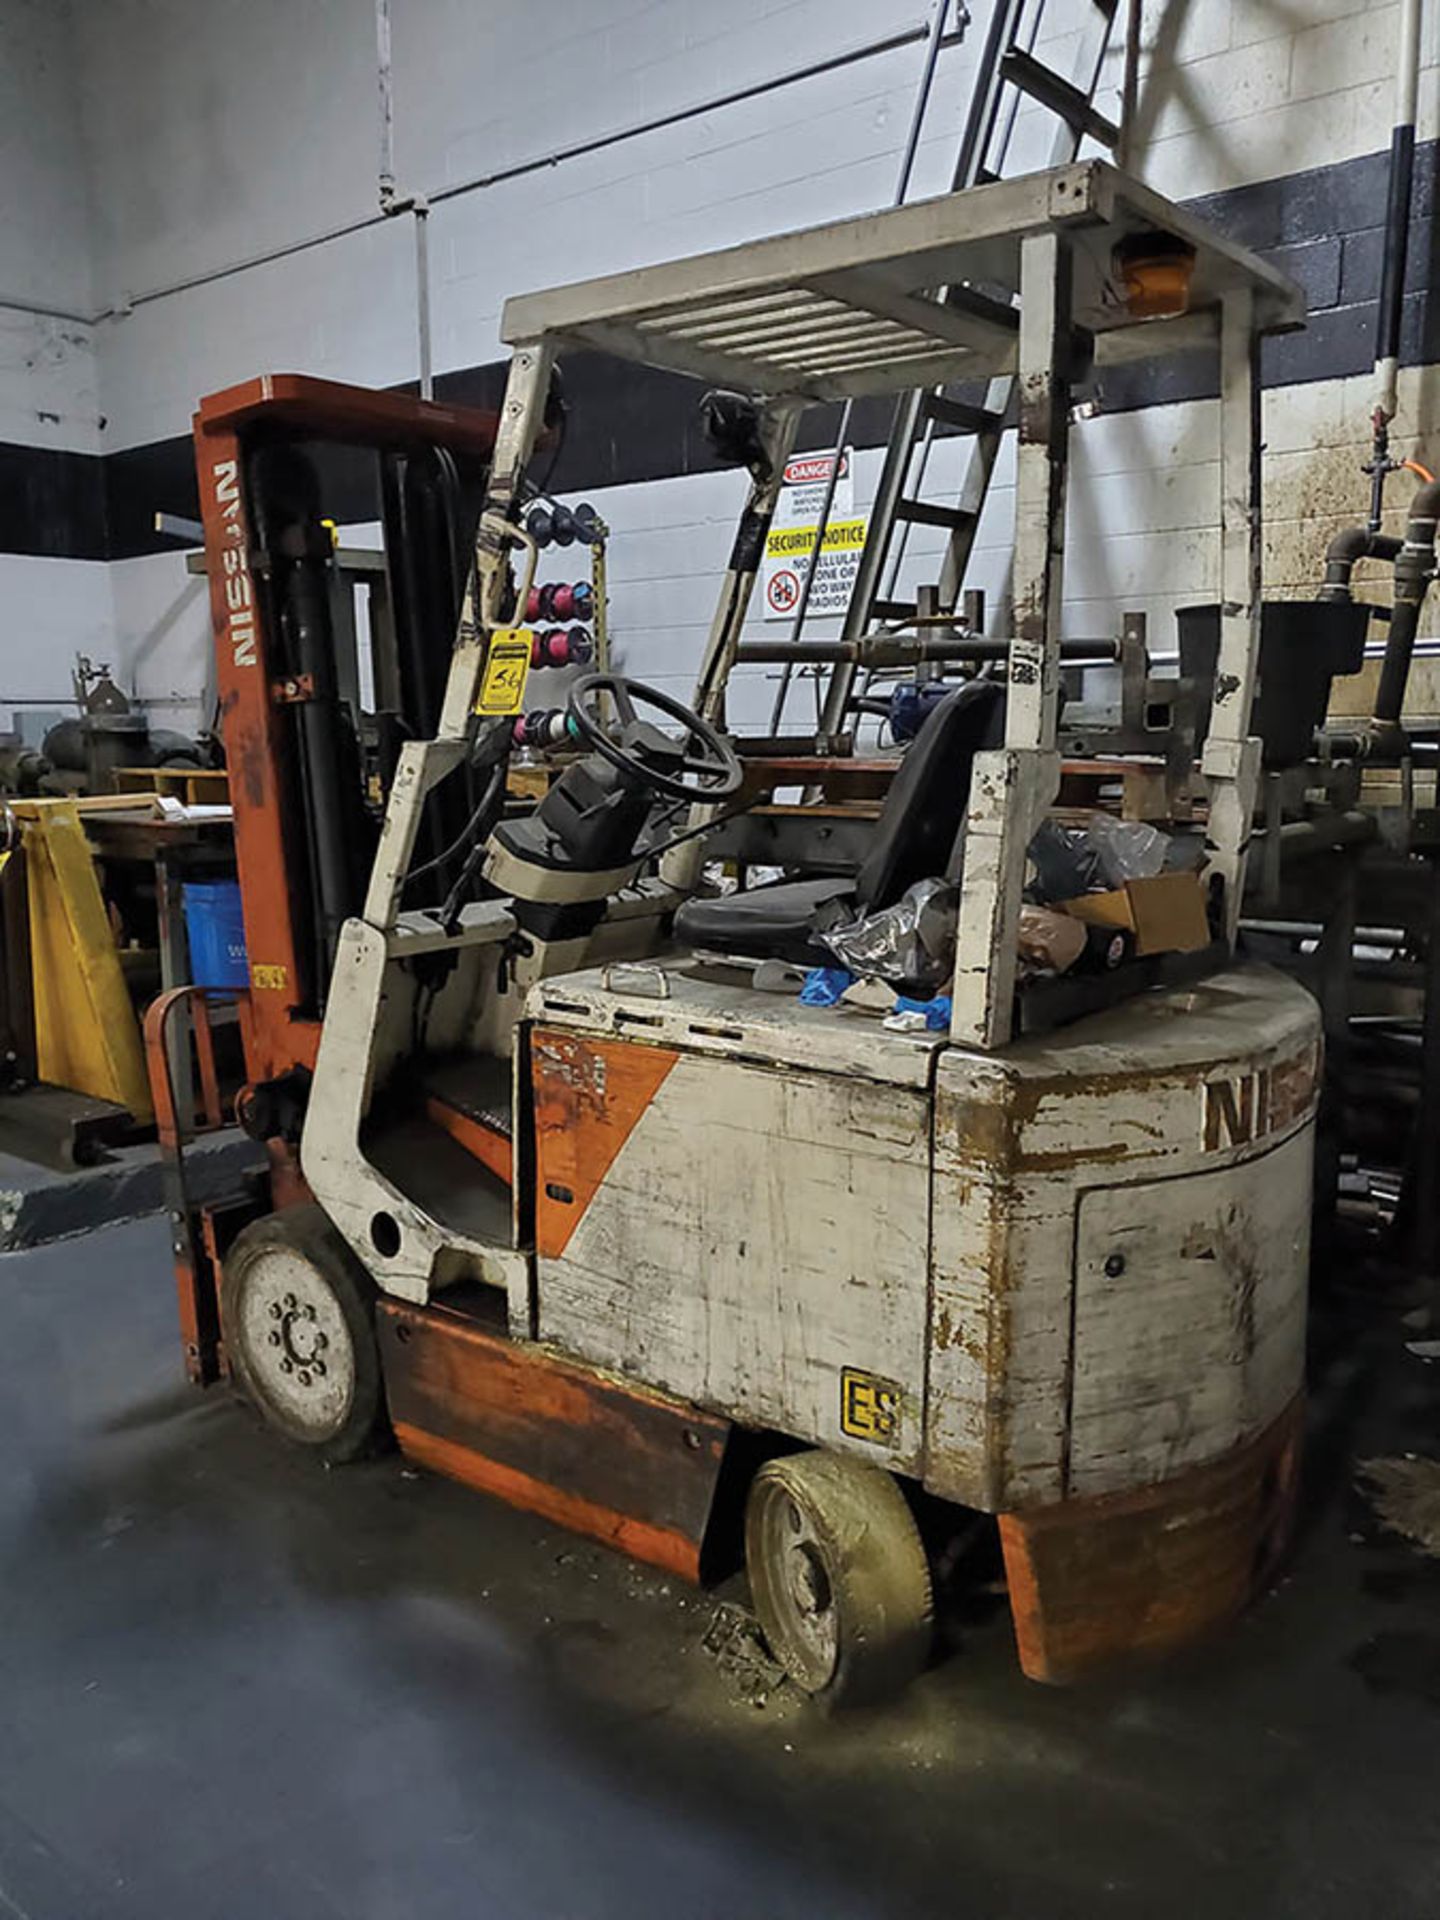 NISSAN 4,700 ELECTRIC FORKLIFT, 36V, SIDESHIFT, 3 STAGE MAST, SOLID TIRES (NEEDS REPAIR) - Image 2 of 6